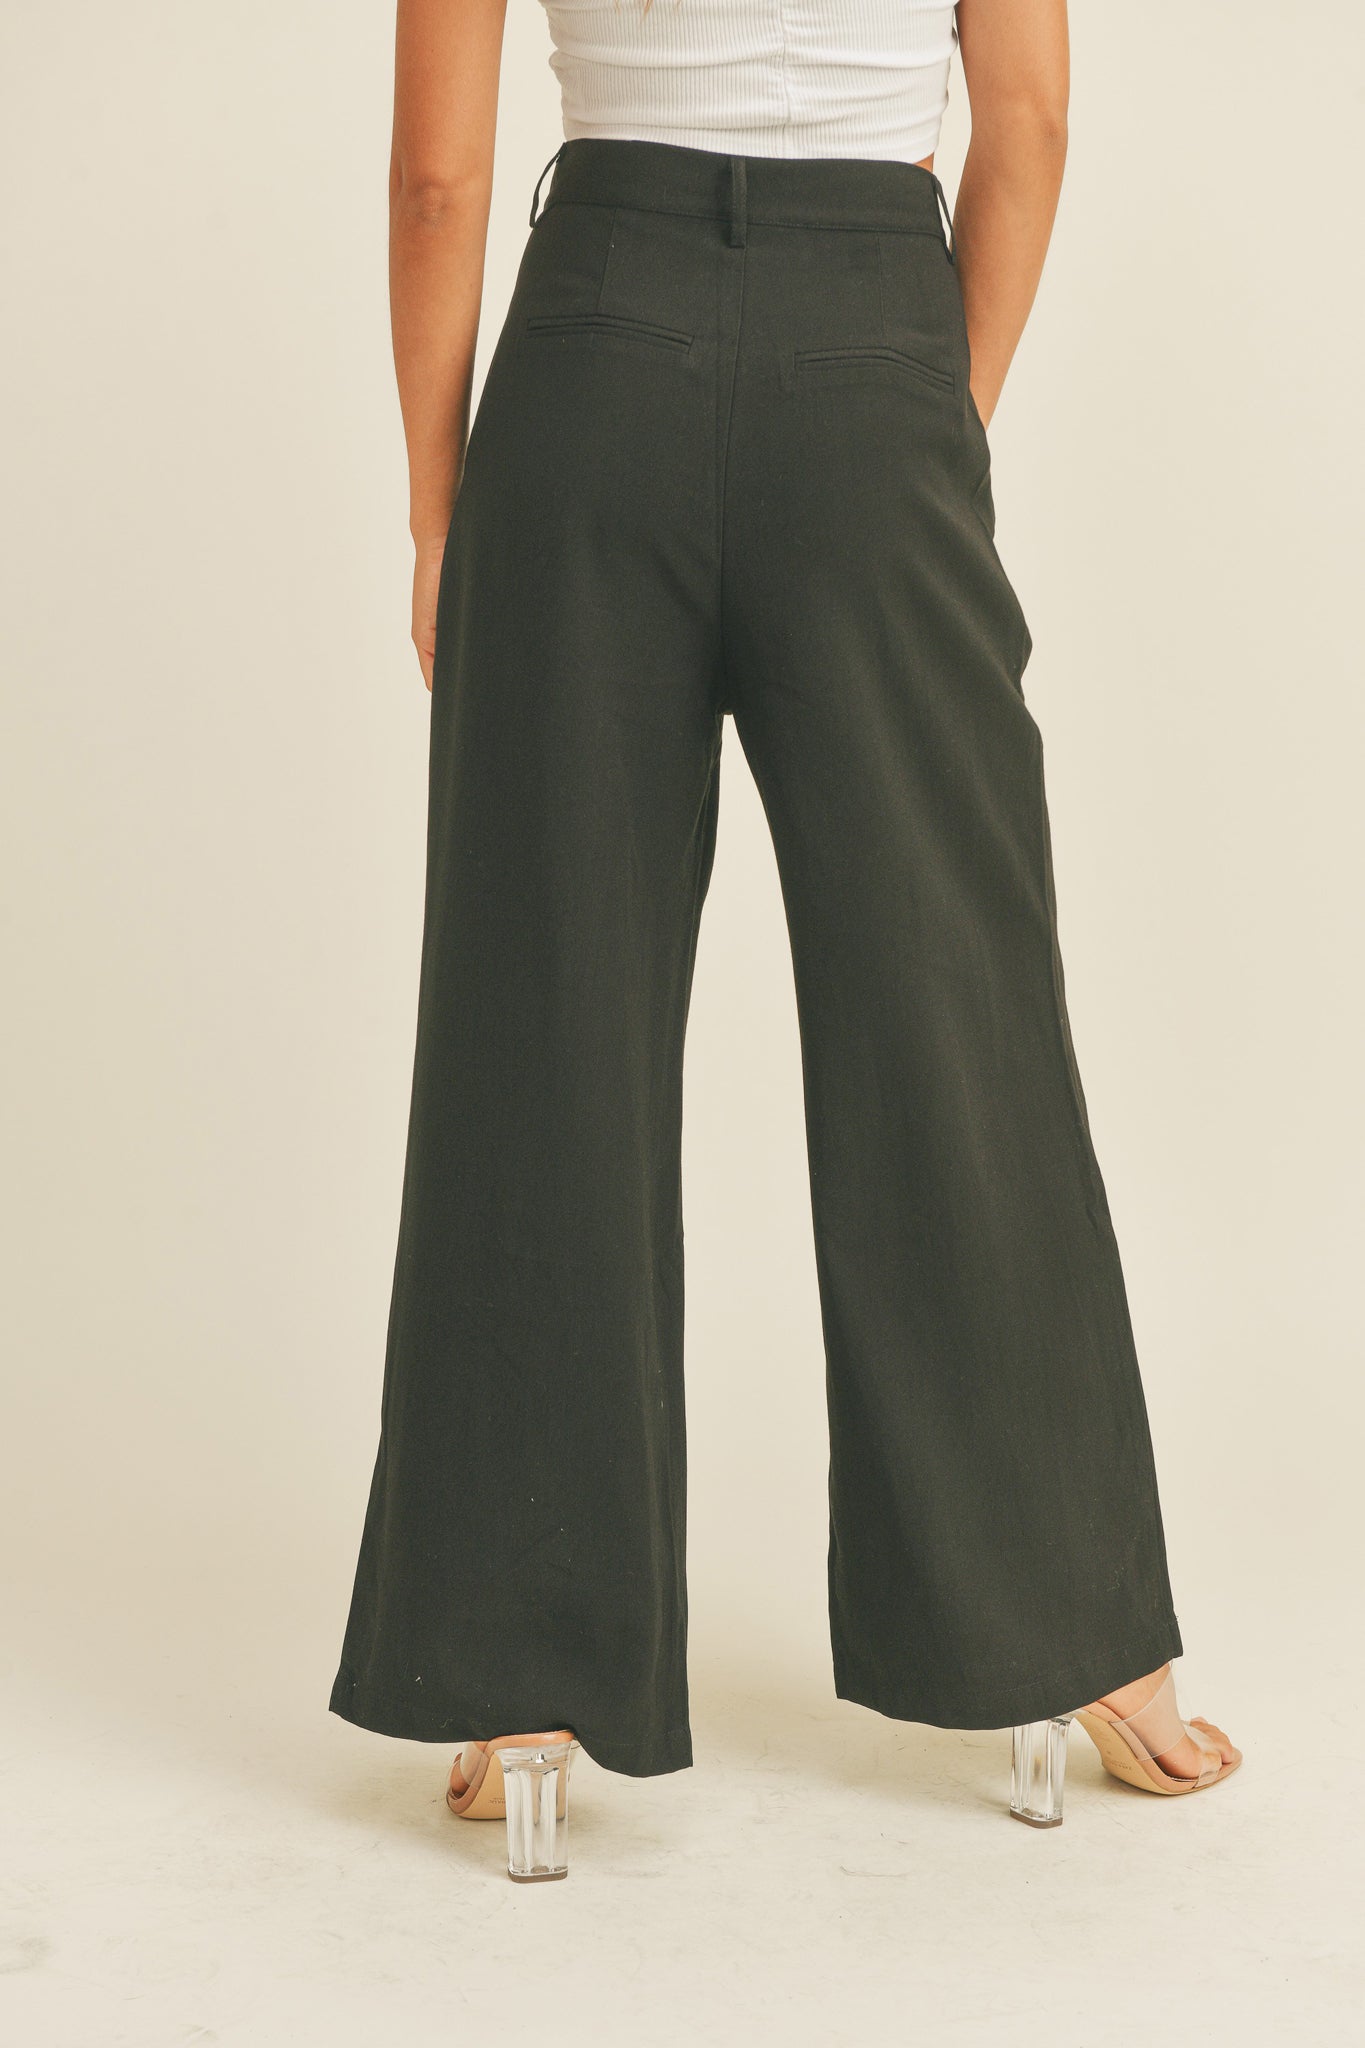 View 3 of Arid Trousers in Black, a Pants from Larrea Cove. Detail: .